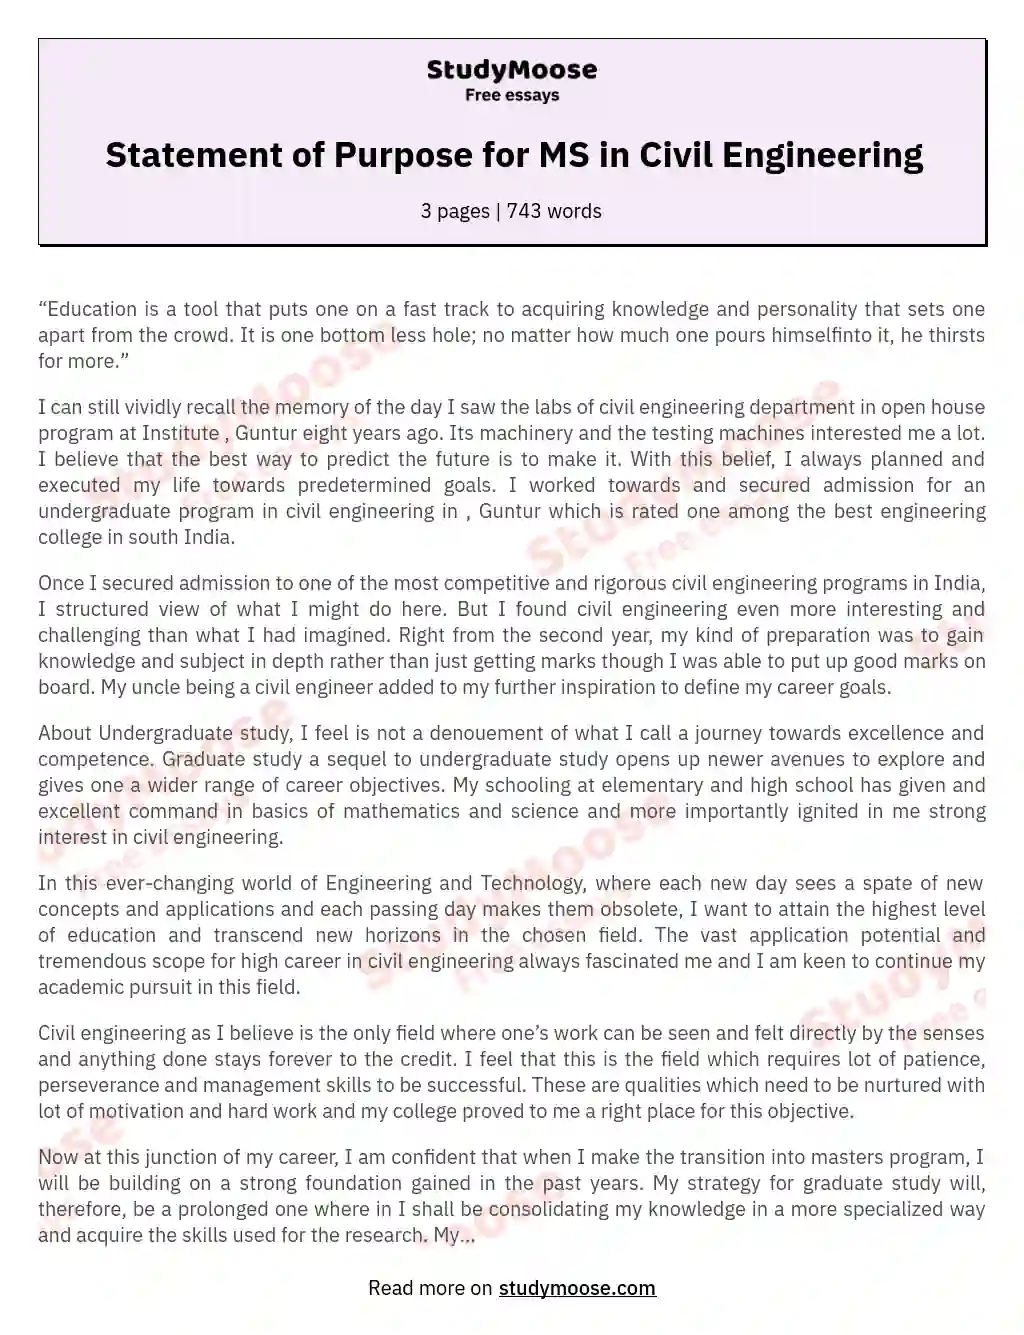 Statement of Purpose for MS in Civil Engineering essay